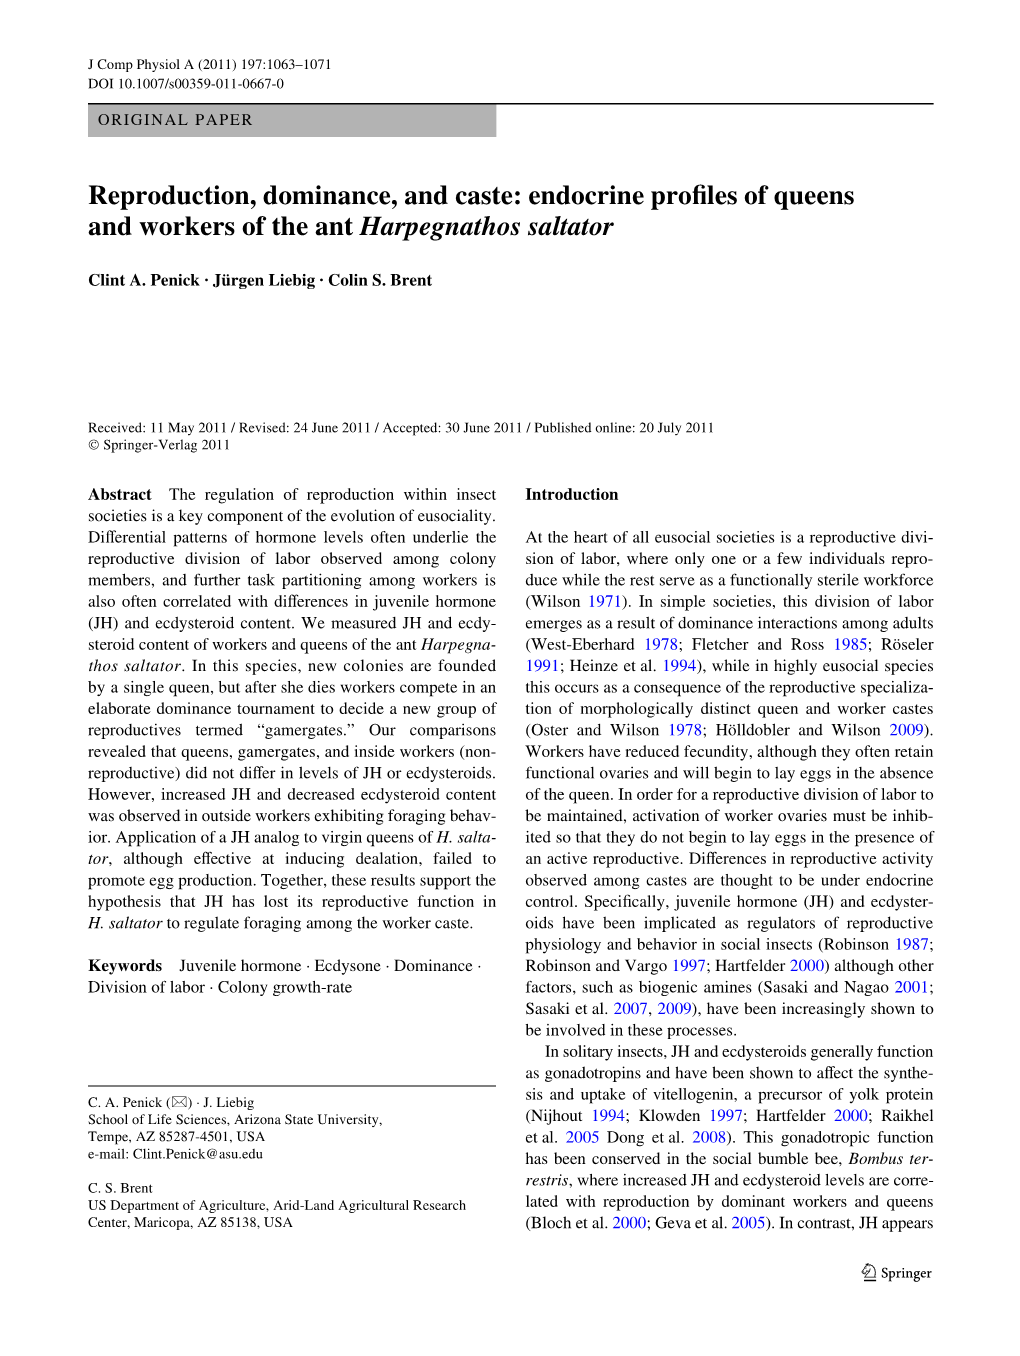 Reproduction, Dominance, and Caste: Endocrine Prowles of Queens and Workers of the Ant Harpegnathos Saltator